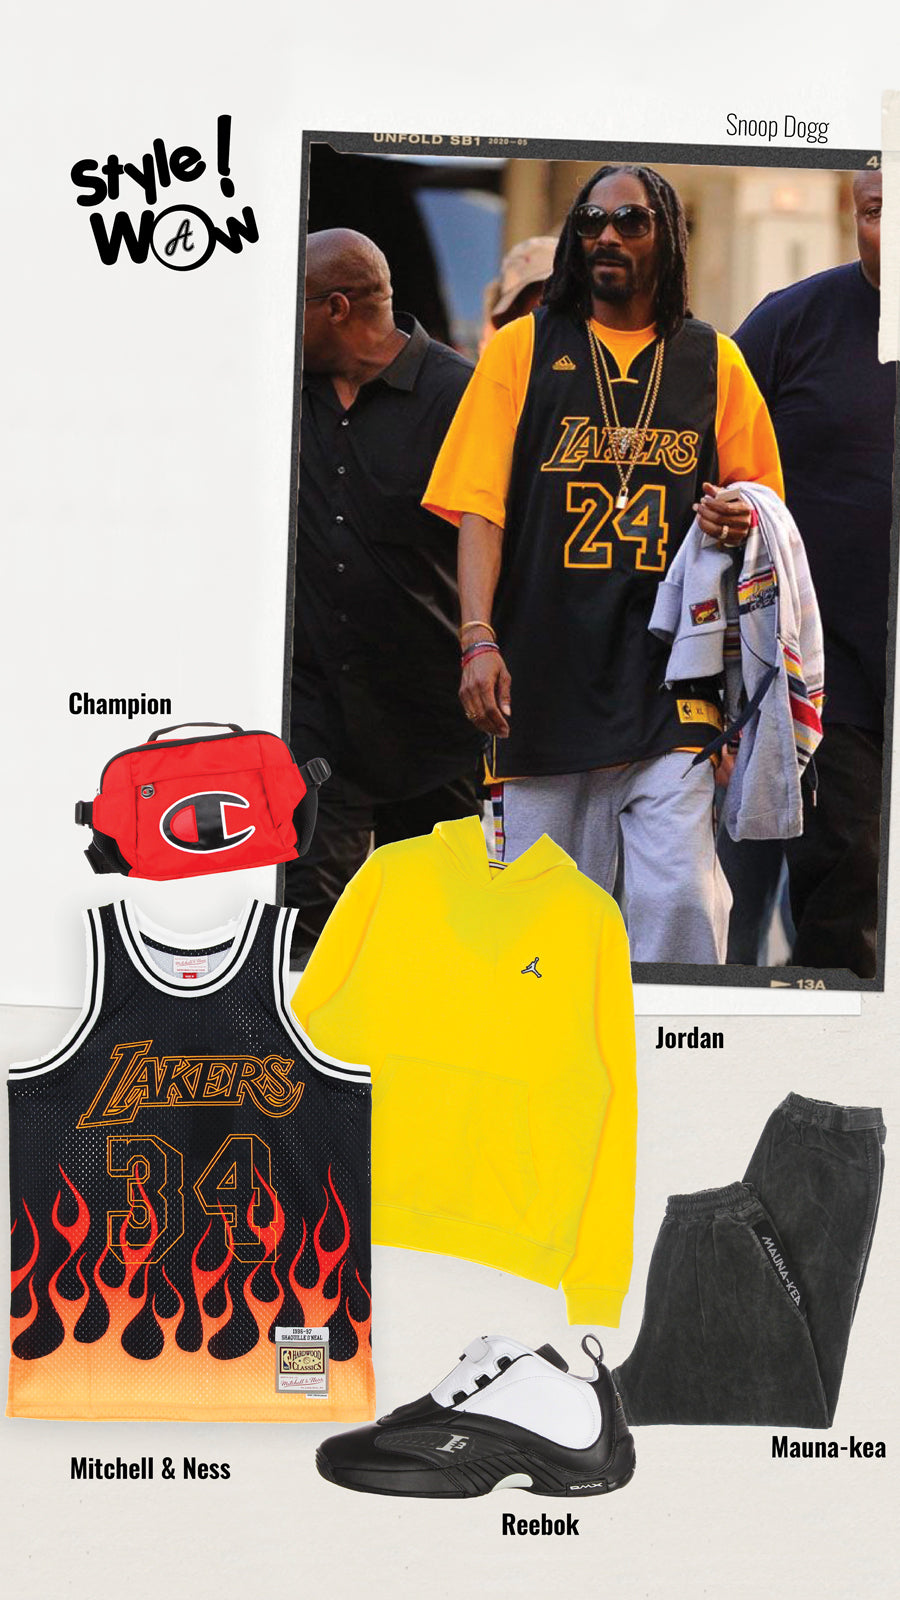 Street outfit inspired by the style of Snoop Dogg wearing Lakers NBA jersey composed of Shaquille O'Neal's Mitchell & Ness gaming tank top with flames, yellow Jordan sweatshirt, gray Mauna-Kea tracksuit trousers, Reebok Answer IV sneakers basketball shoes by Allen Iverson